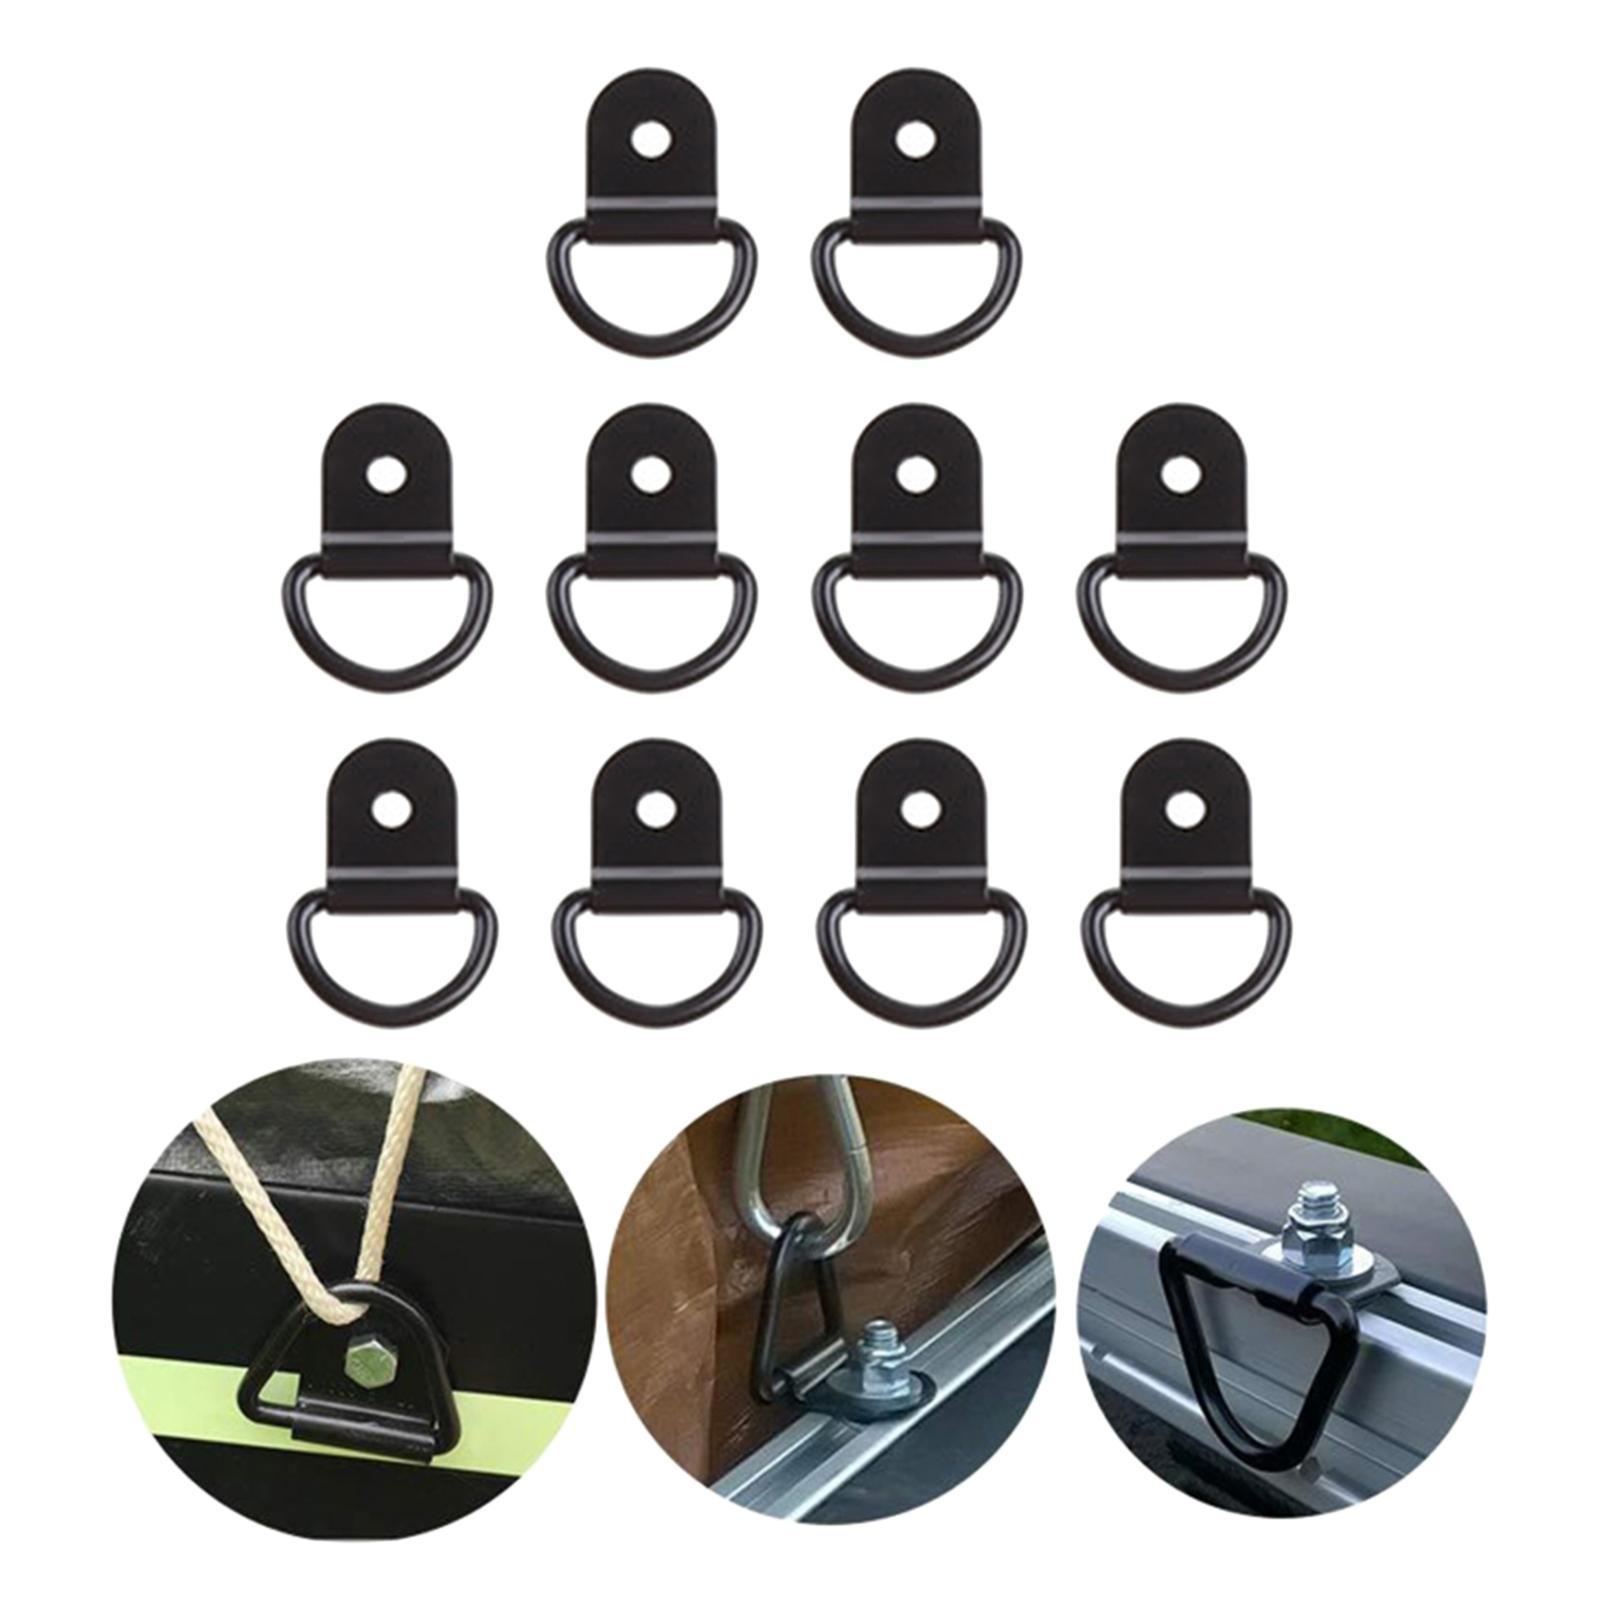 10x D Shape Tie Down Anchors Black Stainless Steel for Trailers Cargo